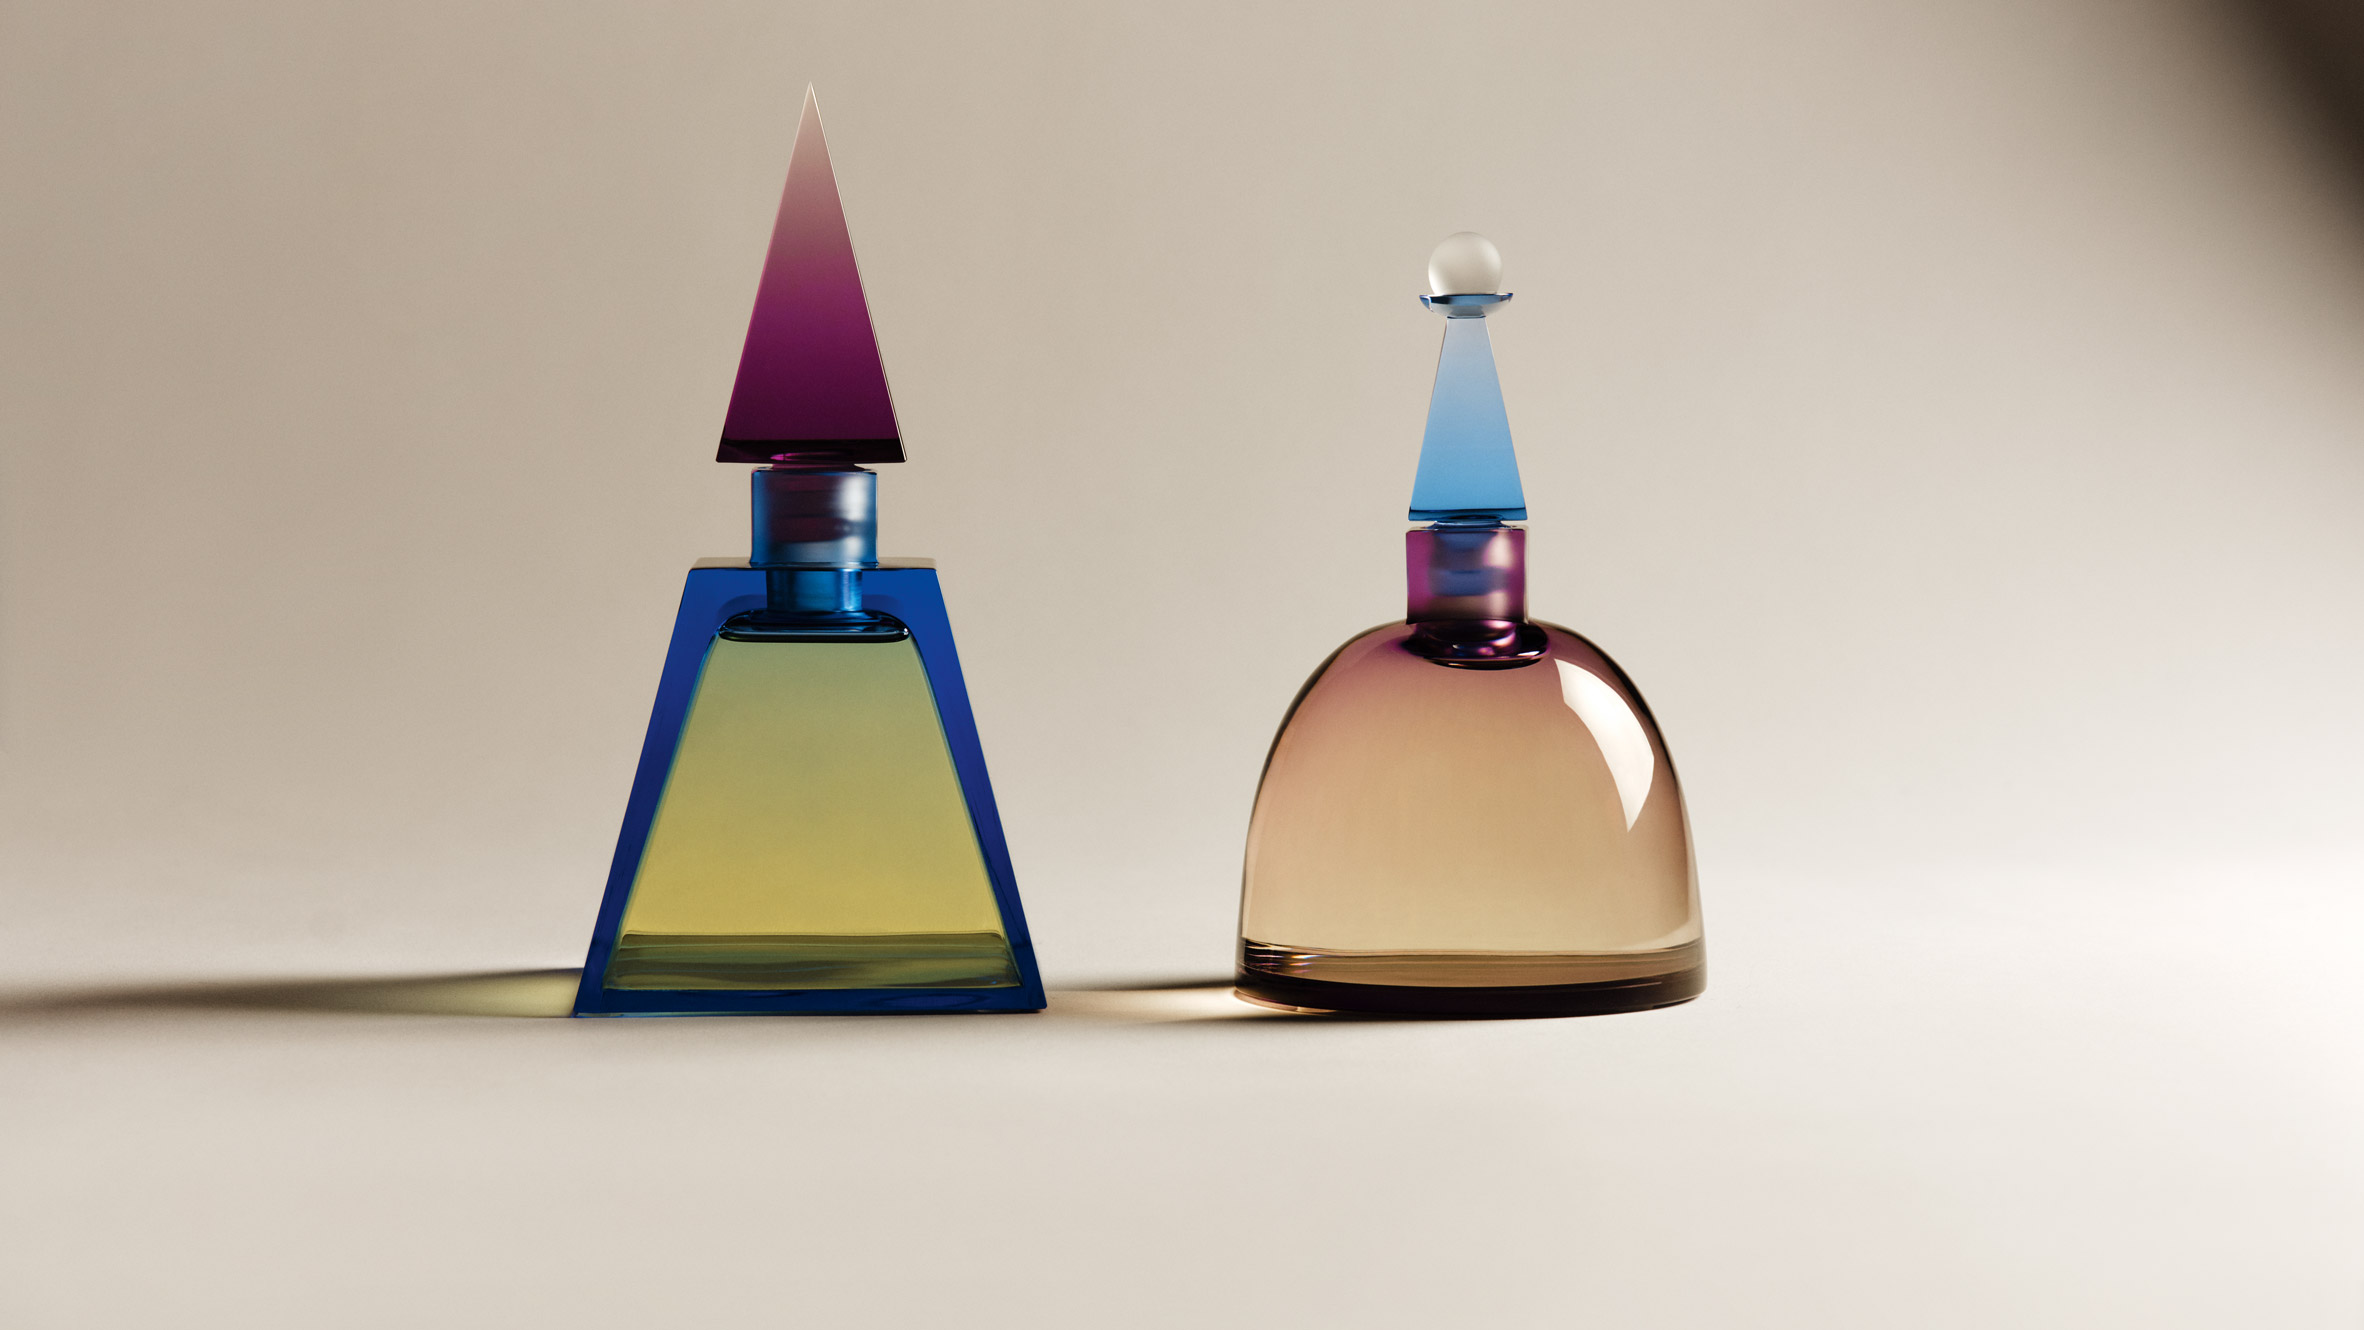 Some of The Best Looking Perfume Bottles